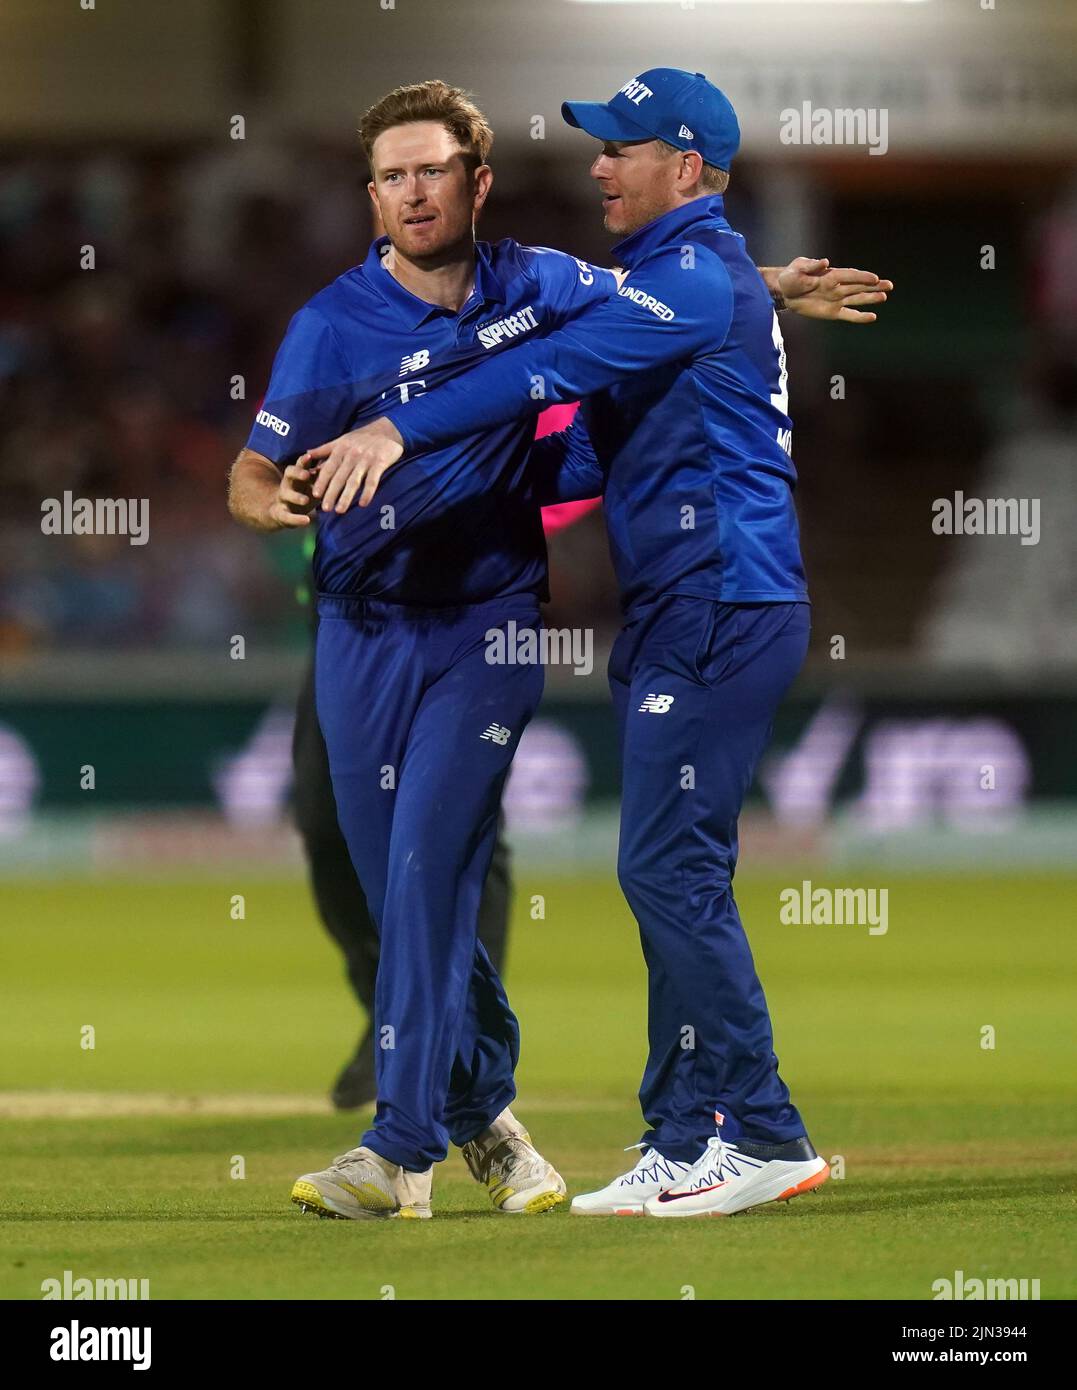 London Spirit's Liam Dawson (left) and Eoin Morgan celebrate a wicket during The Hundred match at Lord's, London. Picture date: Monday August 8, 2022. Stock Photo